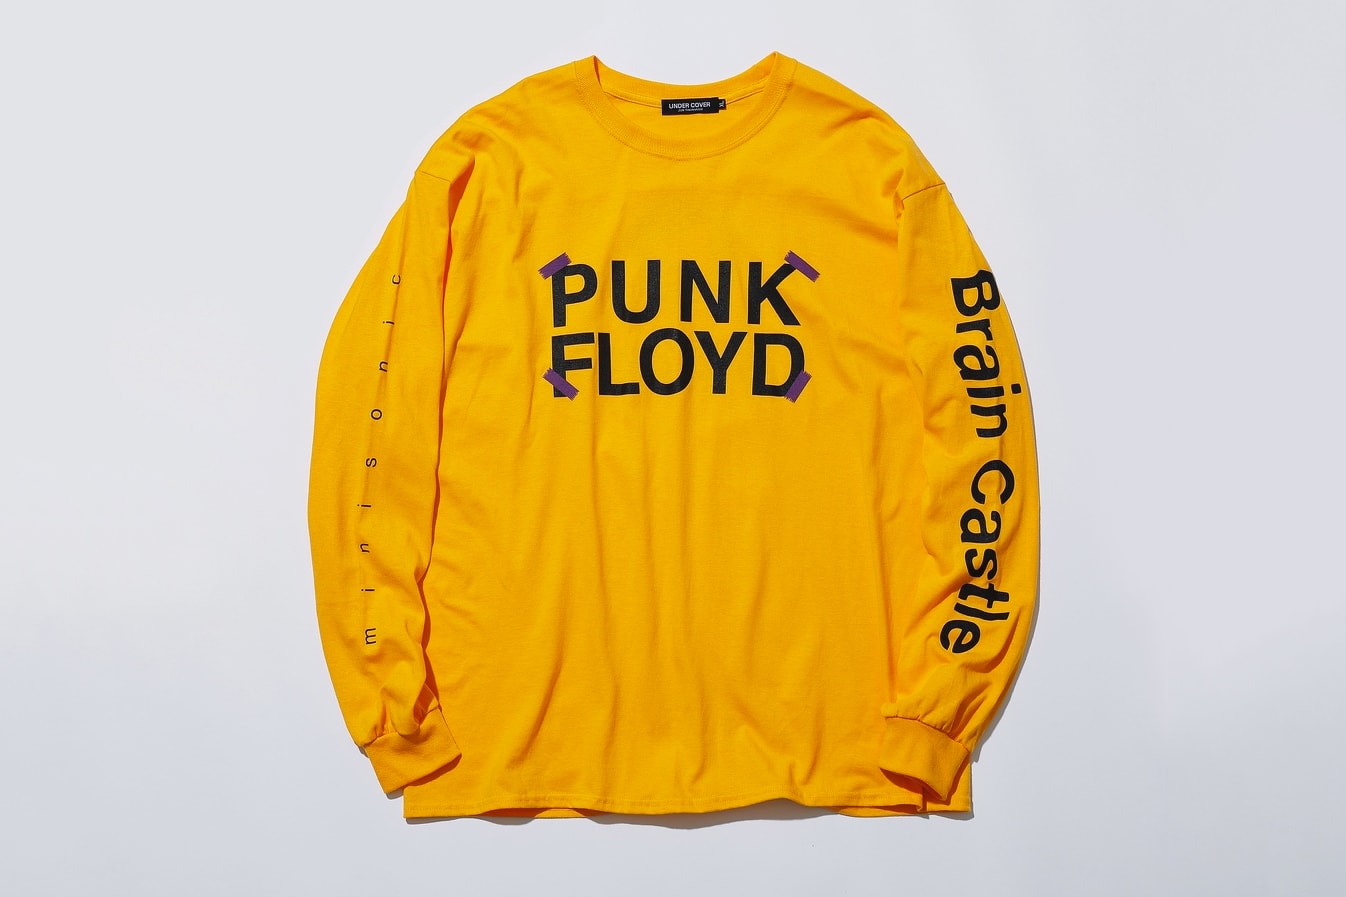 UNDERCOVER RECORDS 新作第一弾は CAN と架空のバンド PUNK FLOYD の関連グッズ